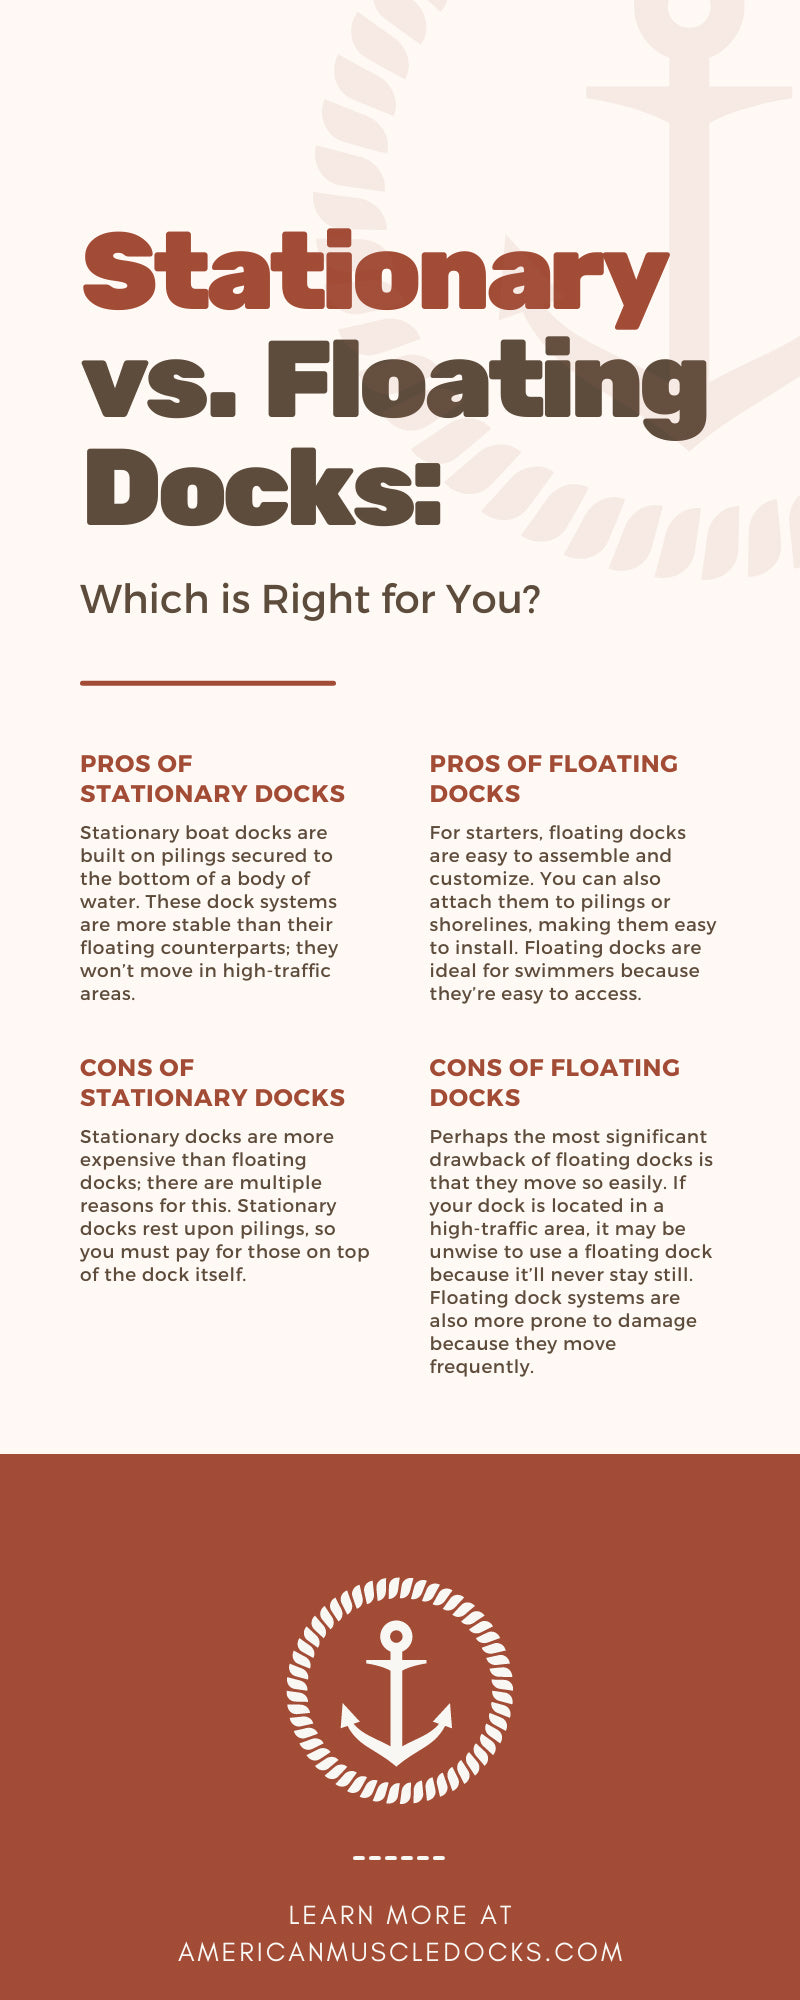 Stationary vs. Floating Docks: Which is Right for You?